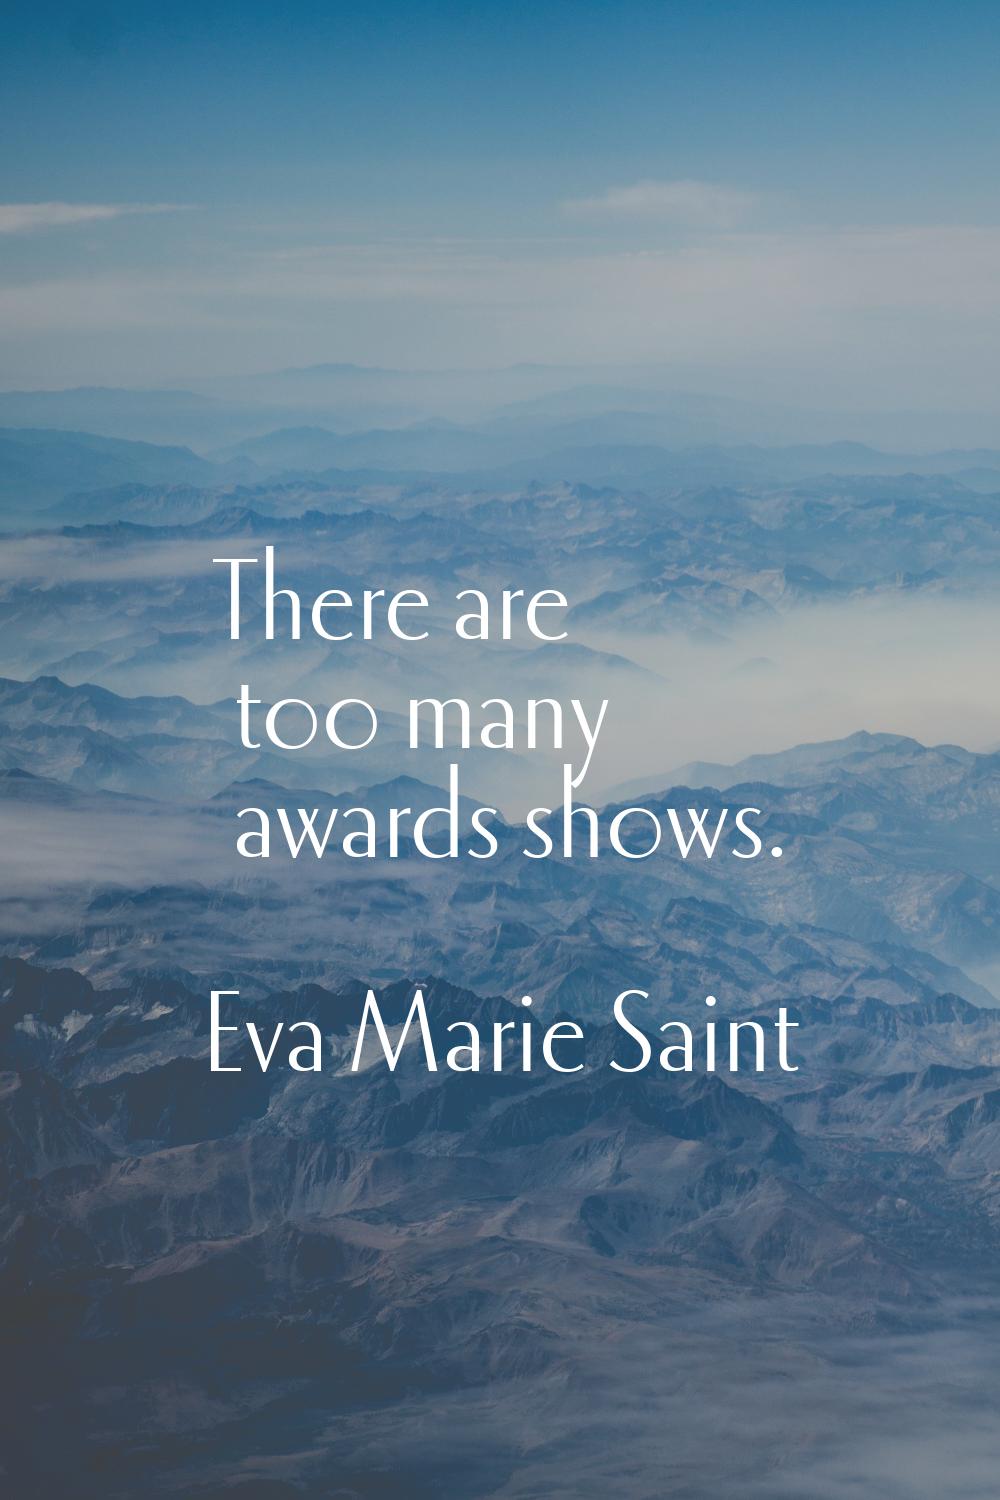 There are too many awards shows.